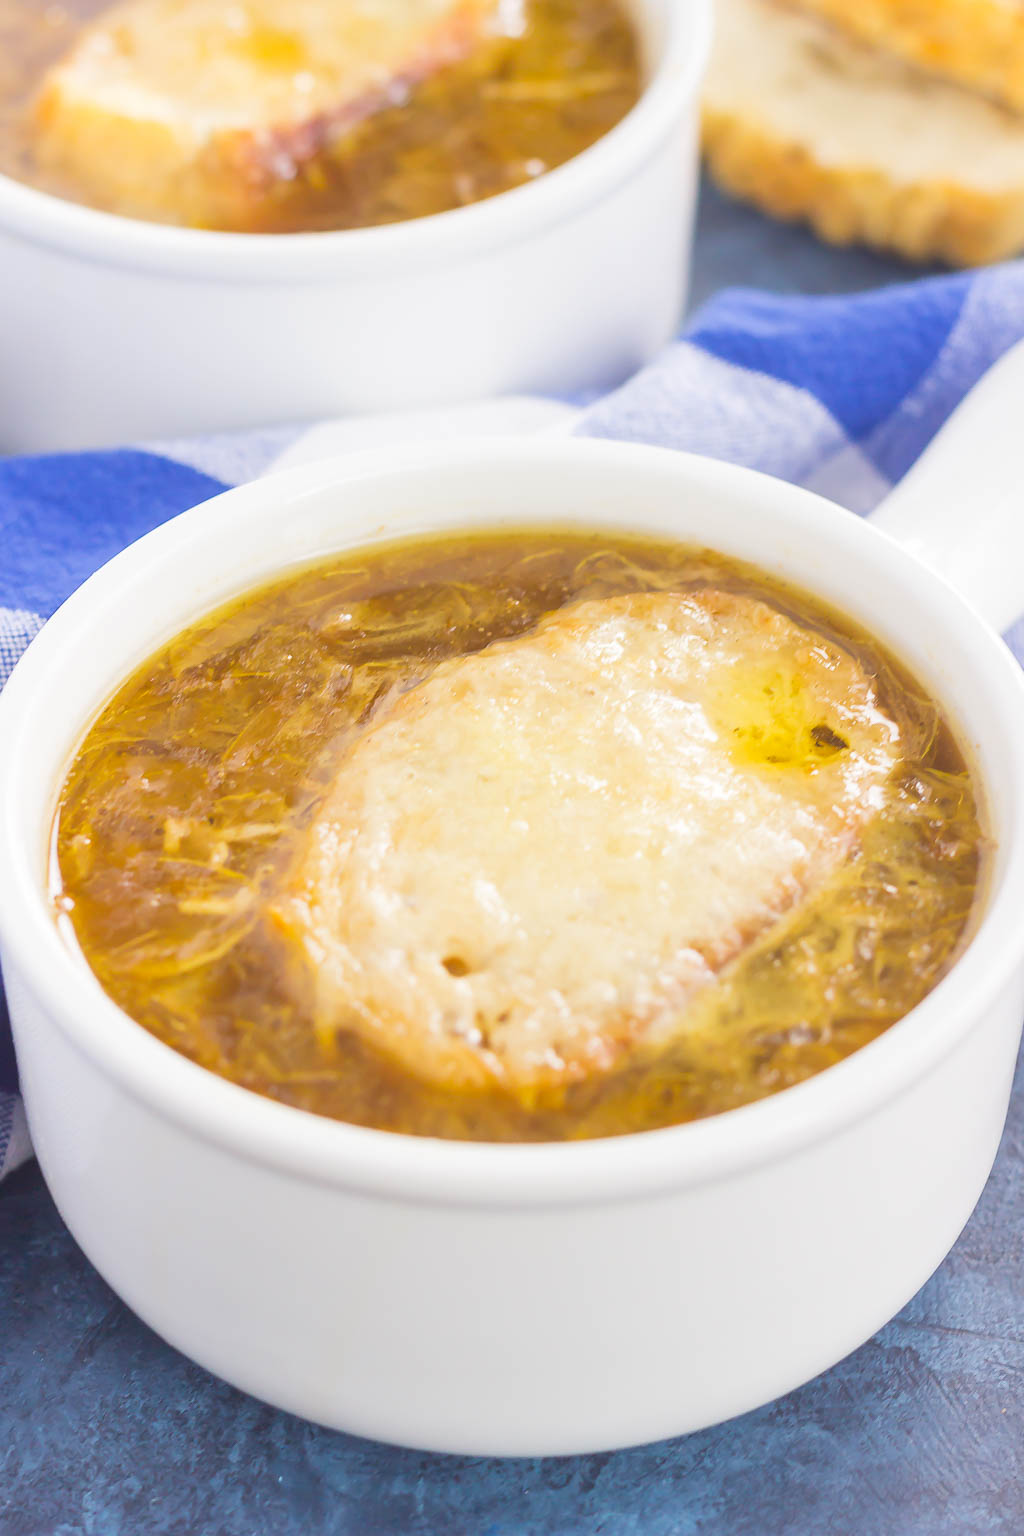 French Onion Soup is loaded with caramelized onions, a rich and savory broth, and just the right amount of spices. It takes just minutes to prepare, letting your stove do the rest of the work. Topped with a piece of French bread and smothered with melted cheese, this is the ultimate soup to warm you up on a chilly day!